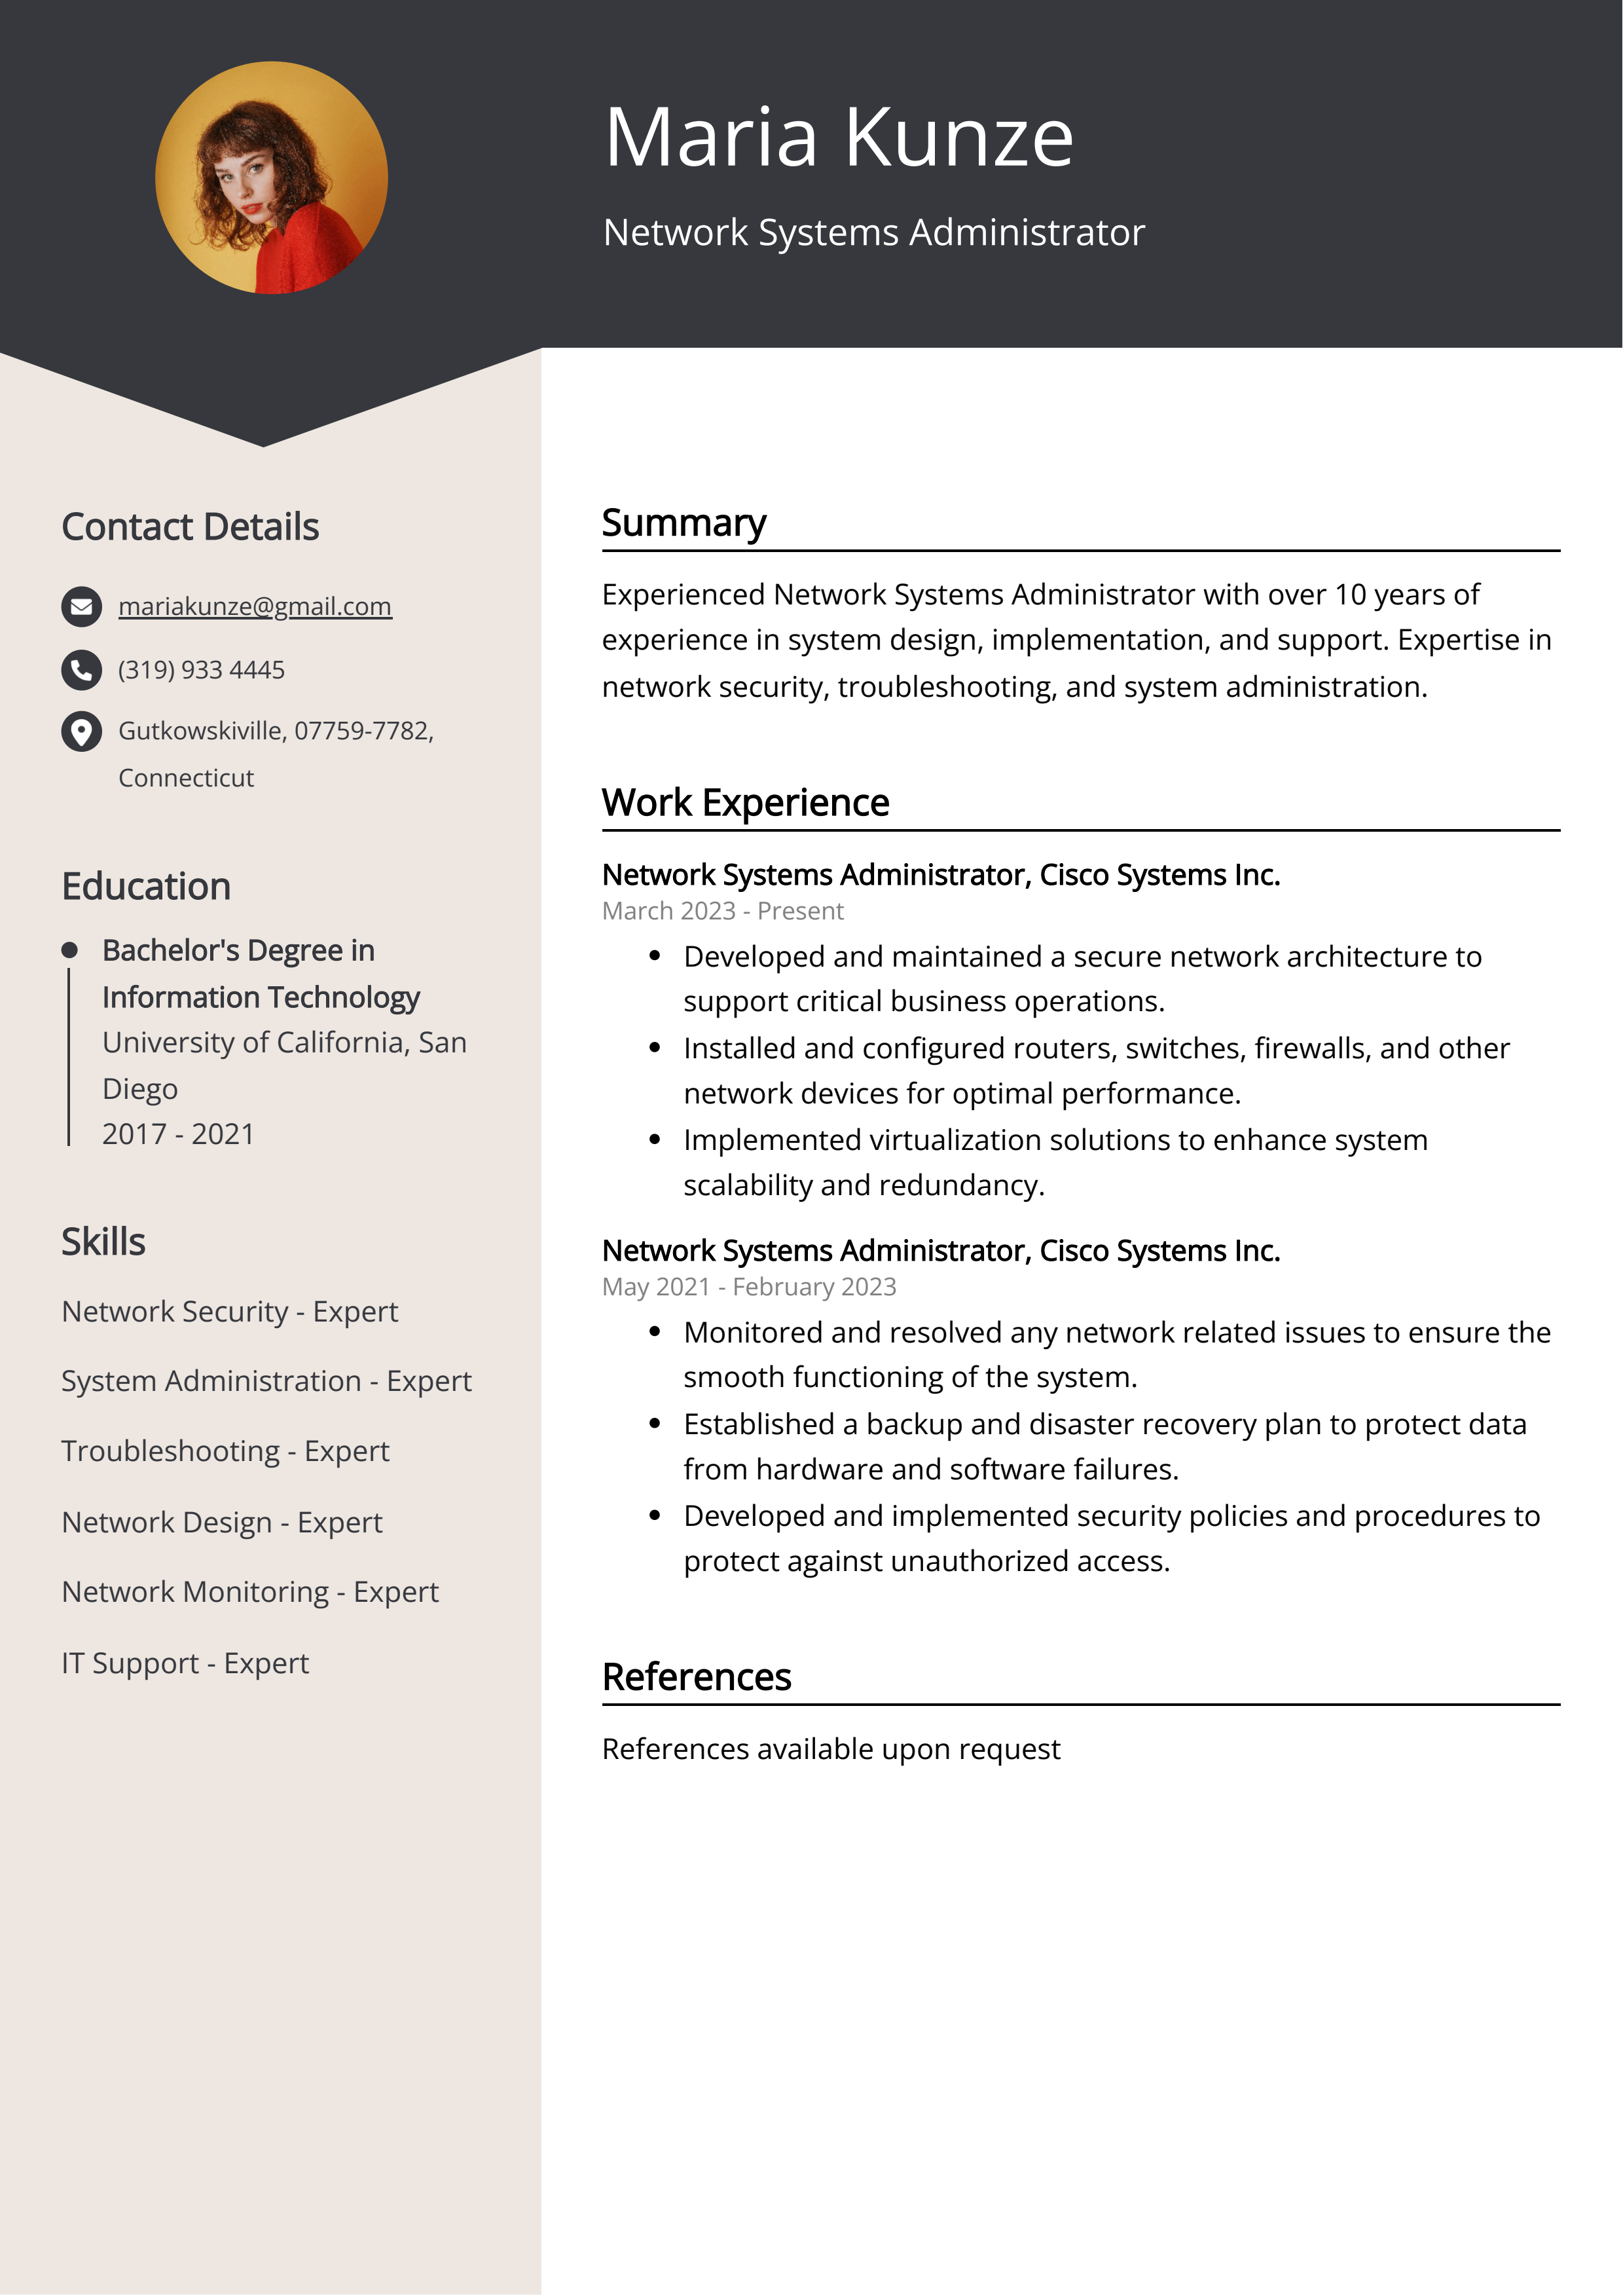 Network Systems Administrator CV Example